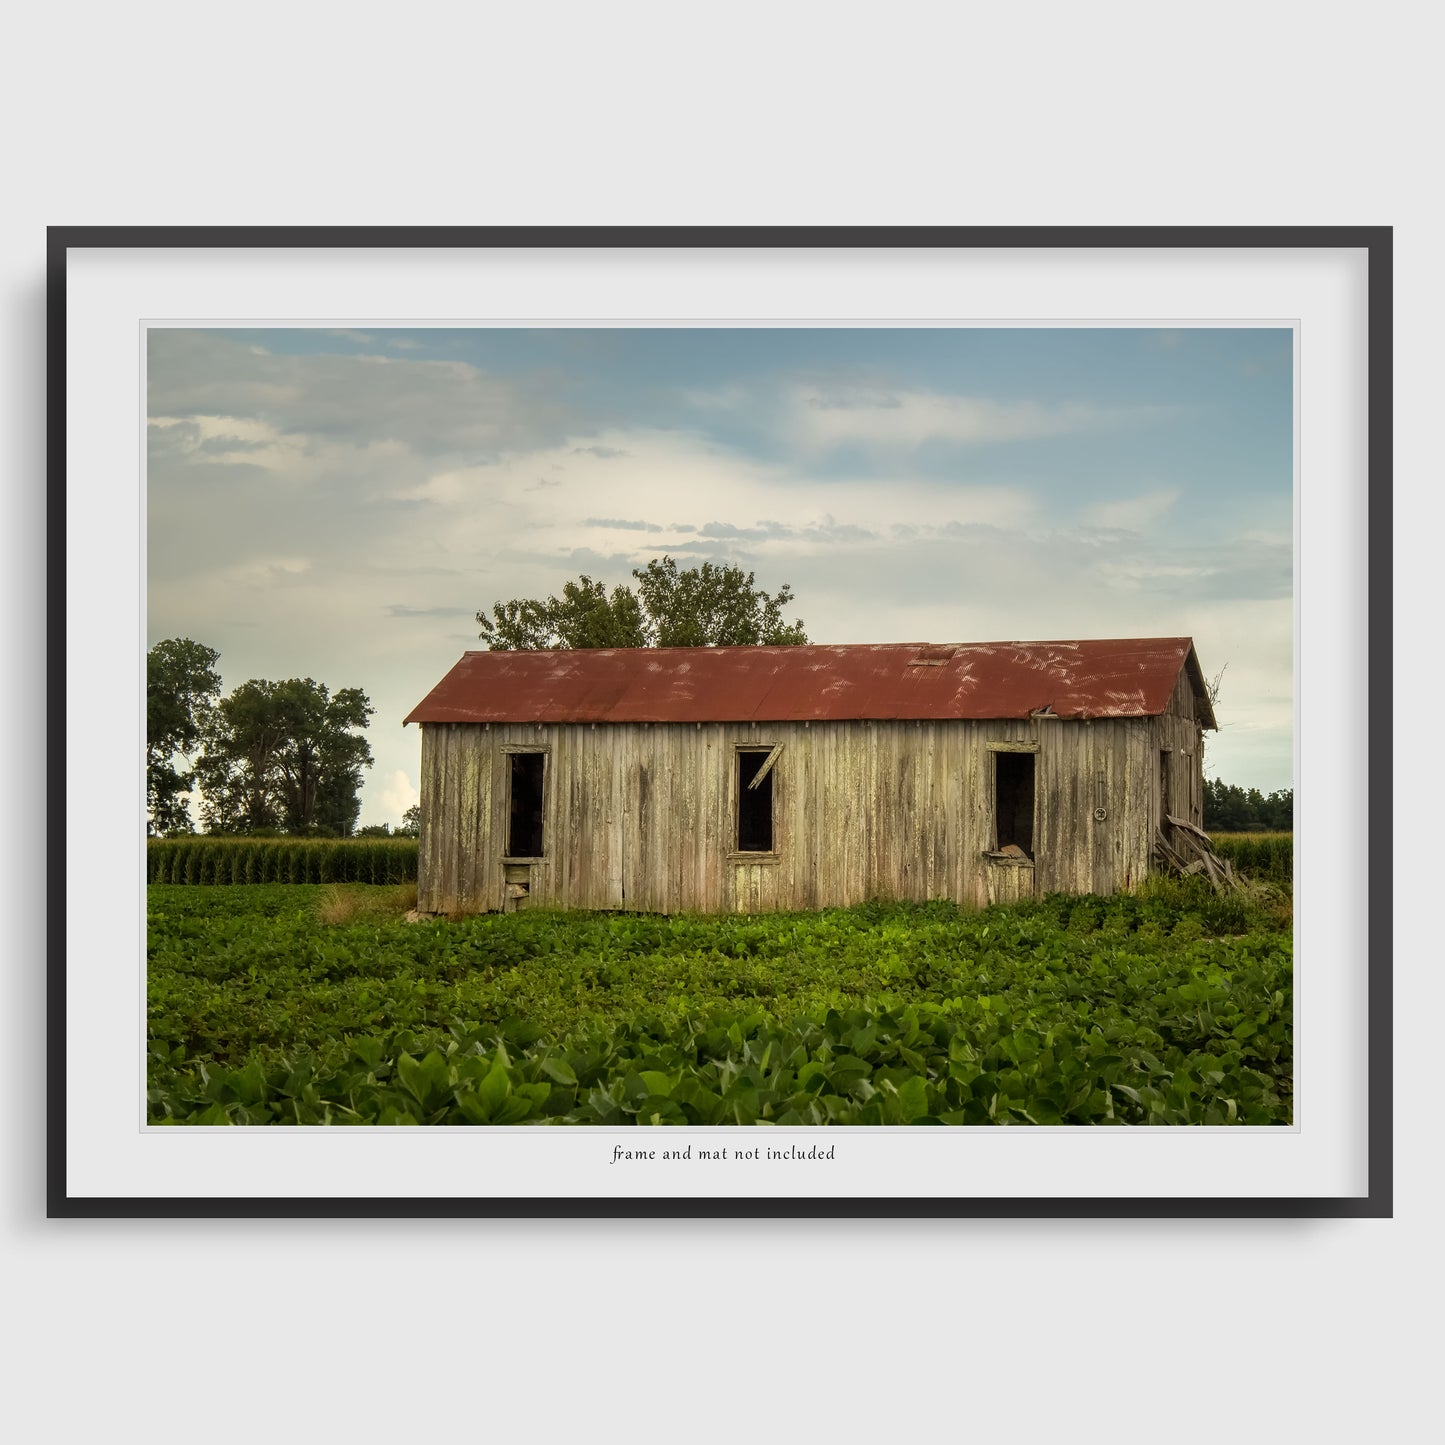 Image displaying a Mississippi Delta wall art print within a thin black frame and white mat, meant to inspire potential display options. The actual product is the print only; the frame and mat are not included with purchase.